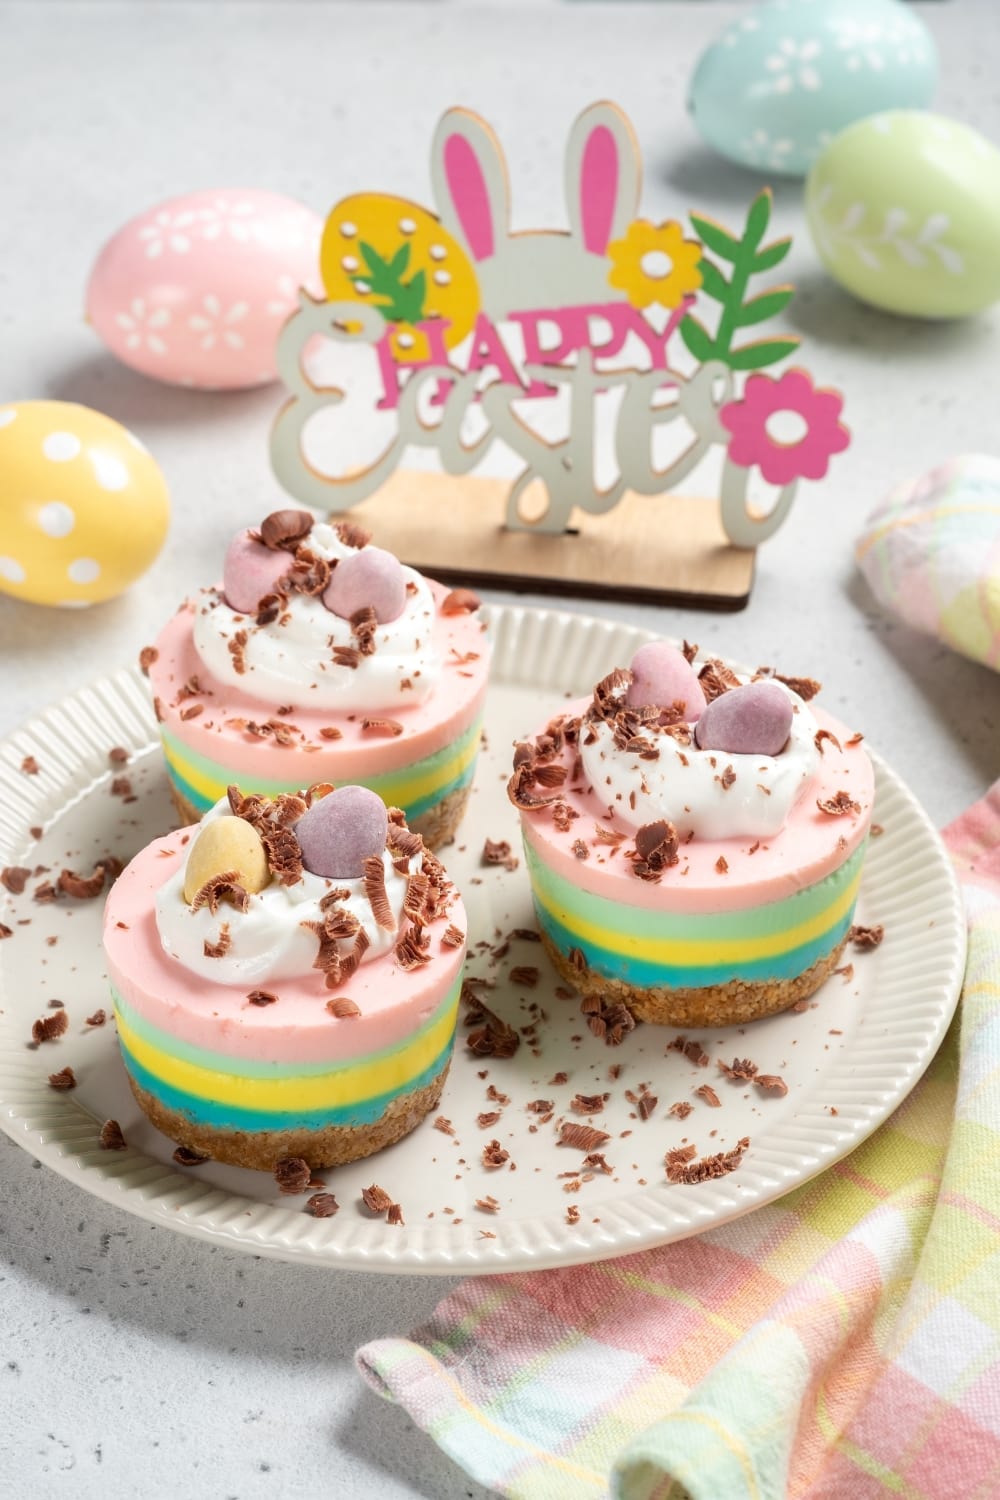 Homemade Mini Cheesecakes with Easter Eggs Candy and Whipped Cream, Sprinkled With Chocolate Crumbles 